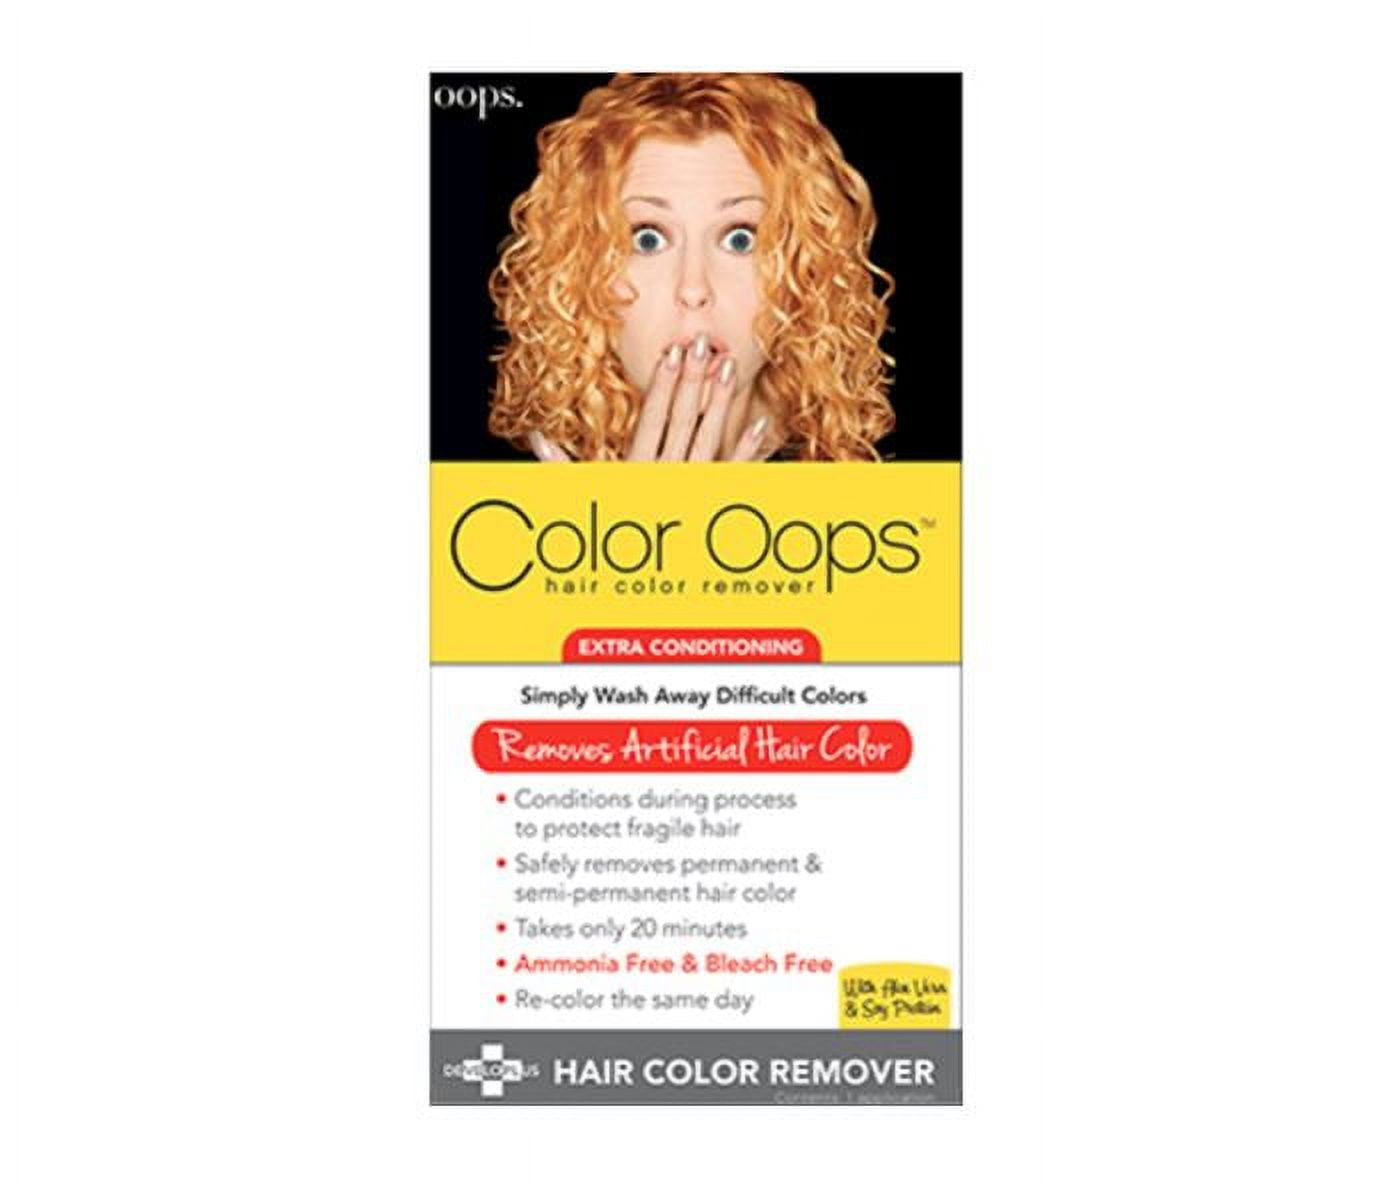 Color Oops Hair Color Remover Extra Conditioning 4oz. (2 Pack) 2 Piece Set